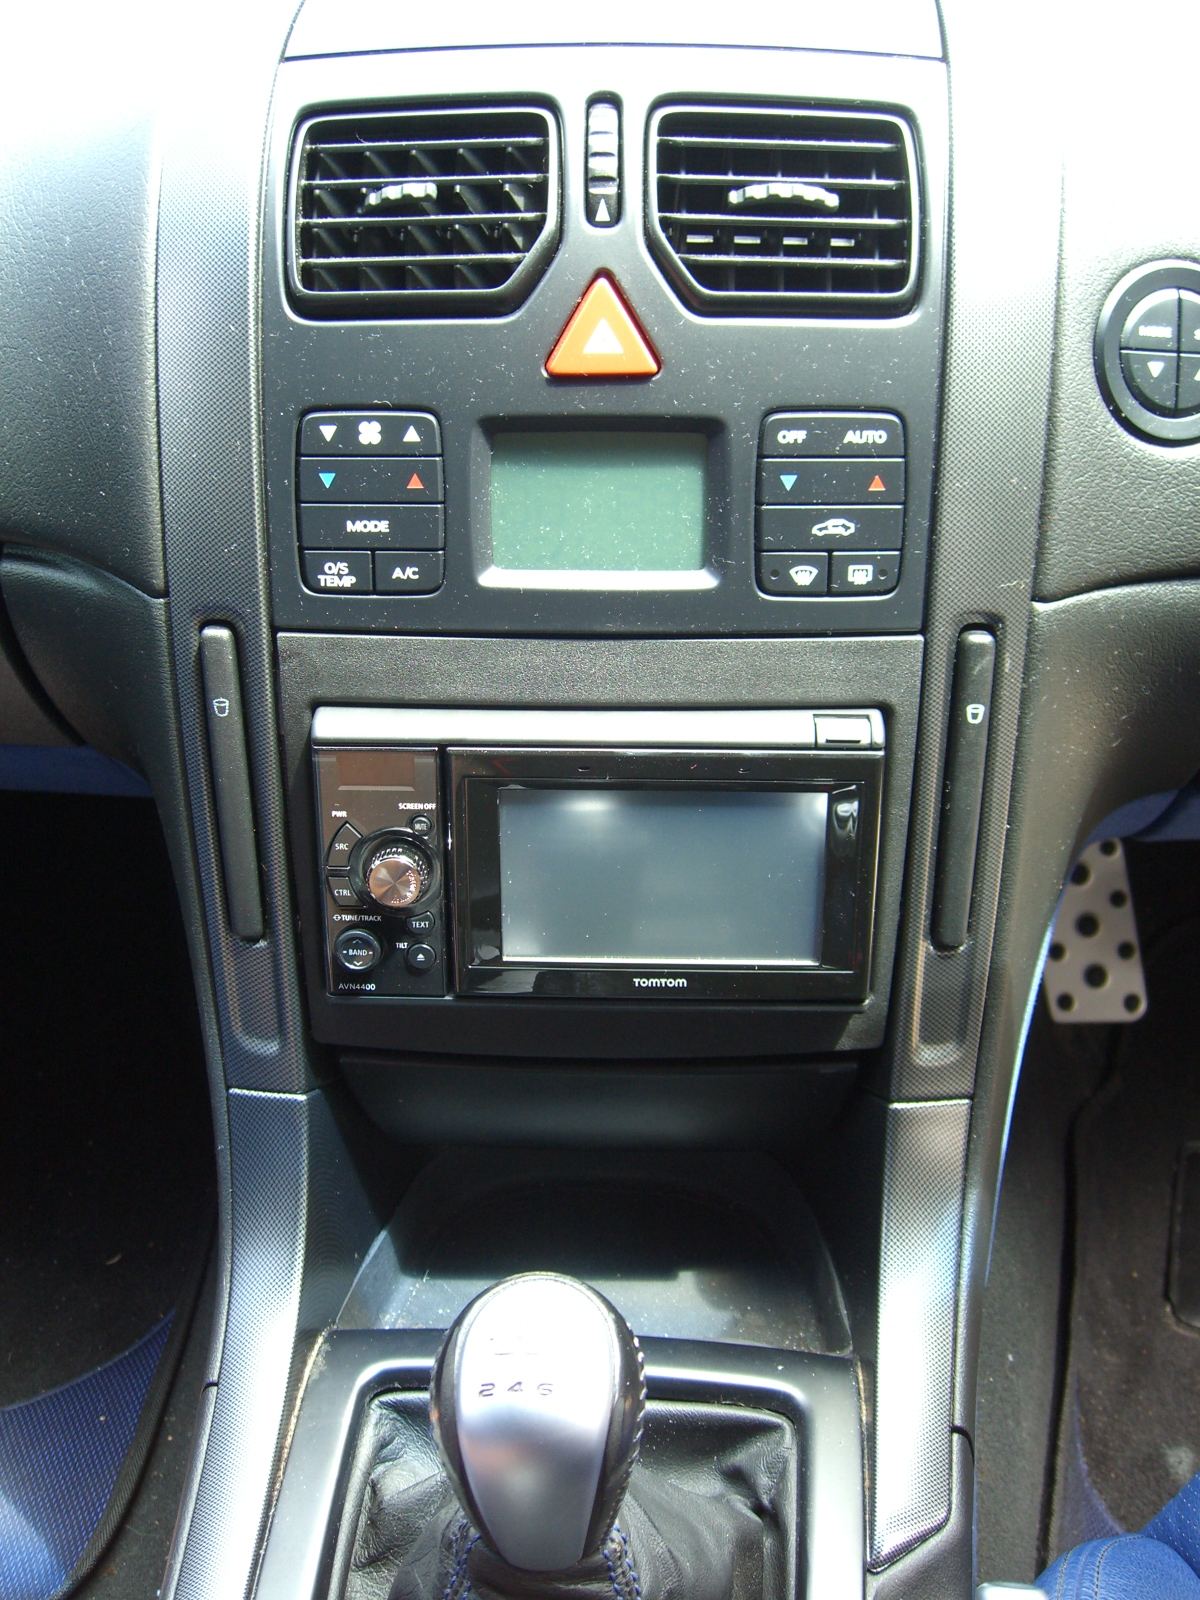 Holden Monaro with Eclipse AVN4400 install